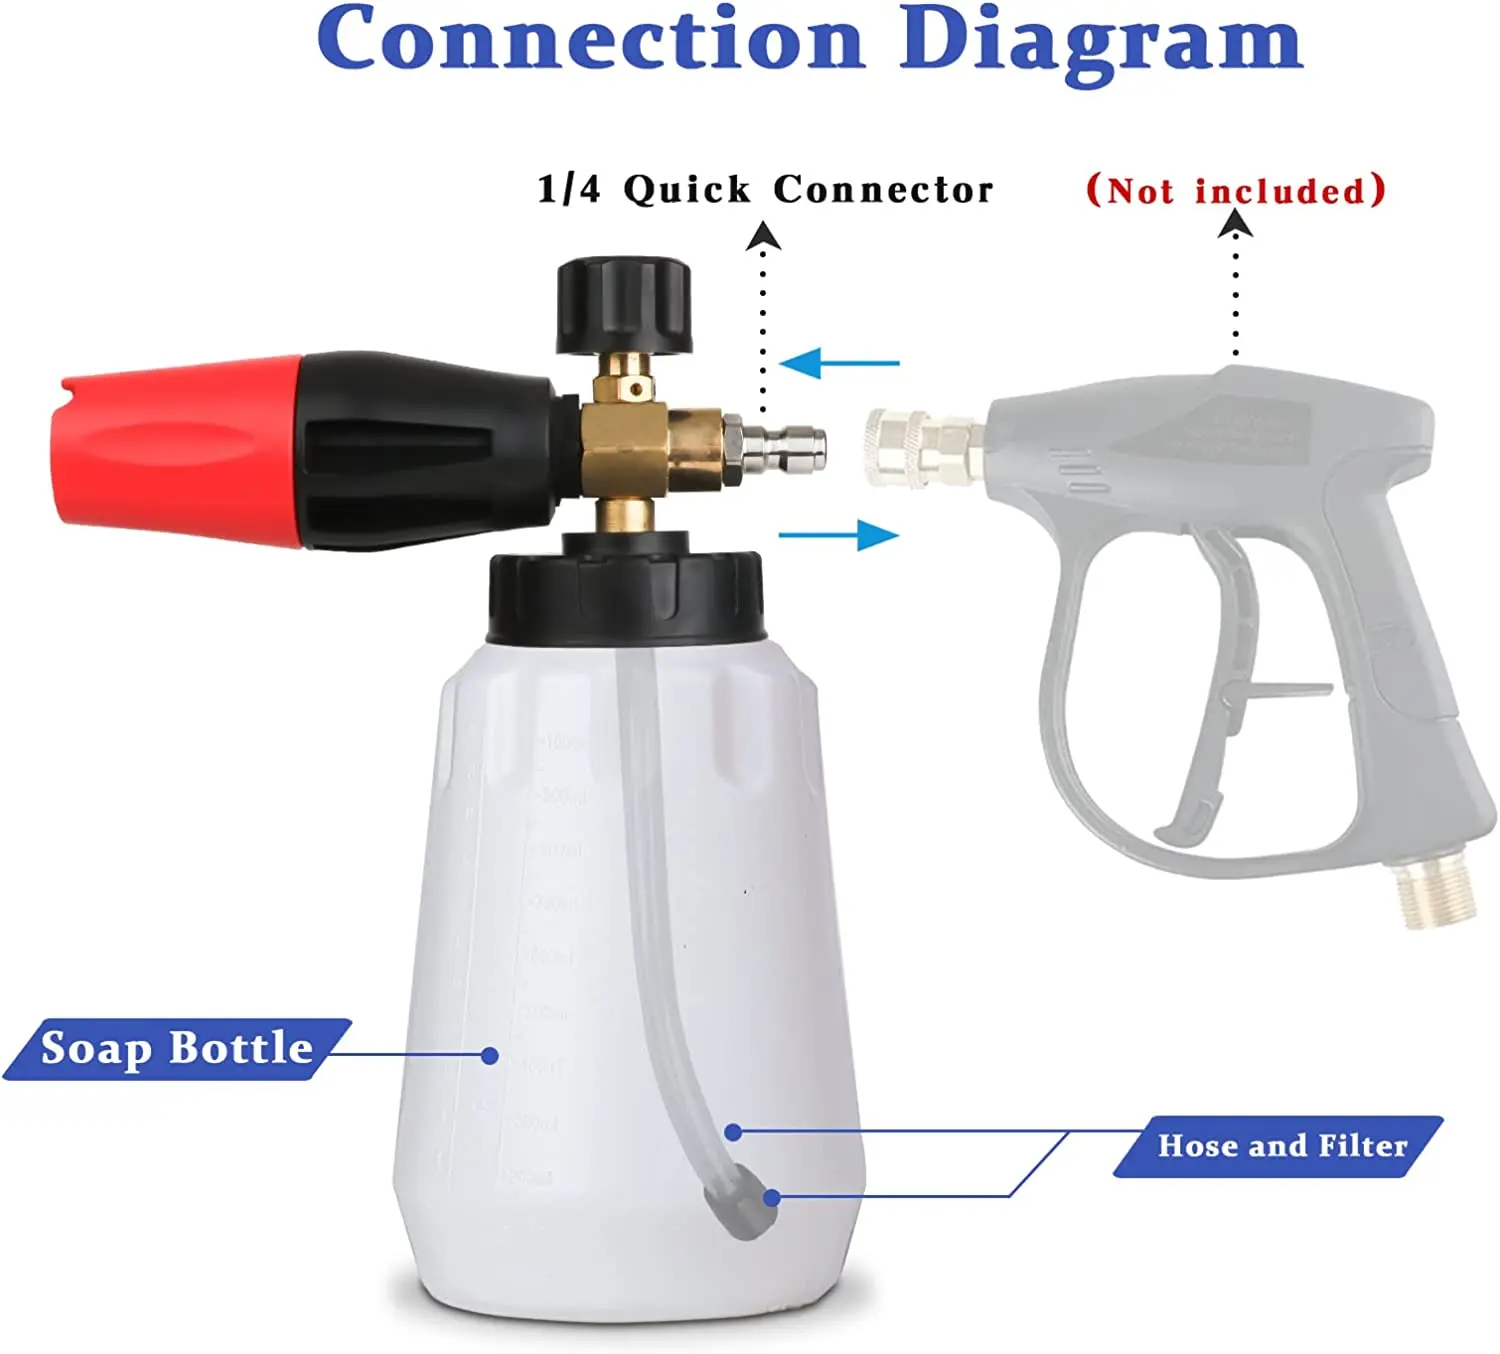 EVEAGE Foam Cannon, 1/4 Inch Quick Connector and 1 L Bottle for